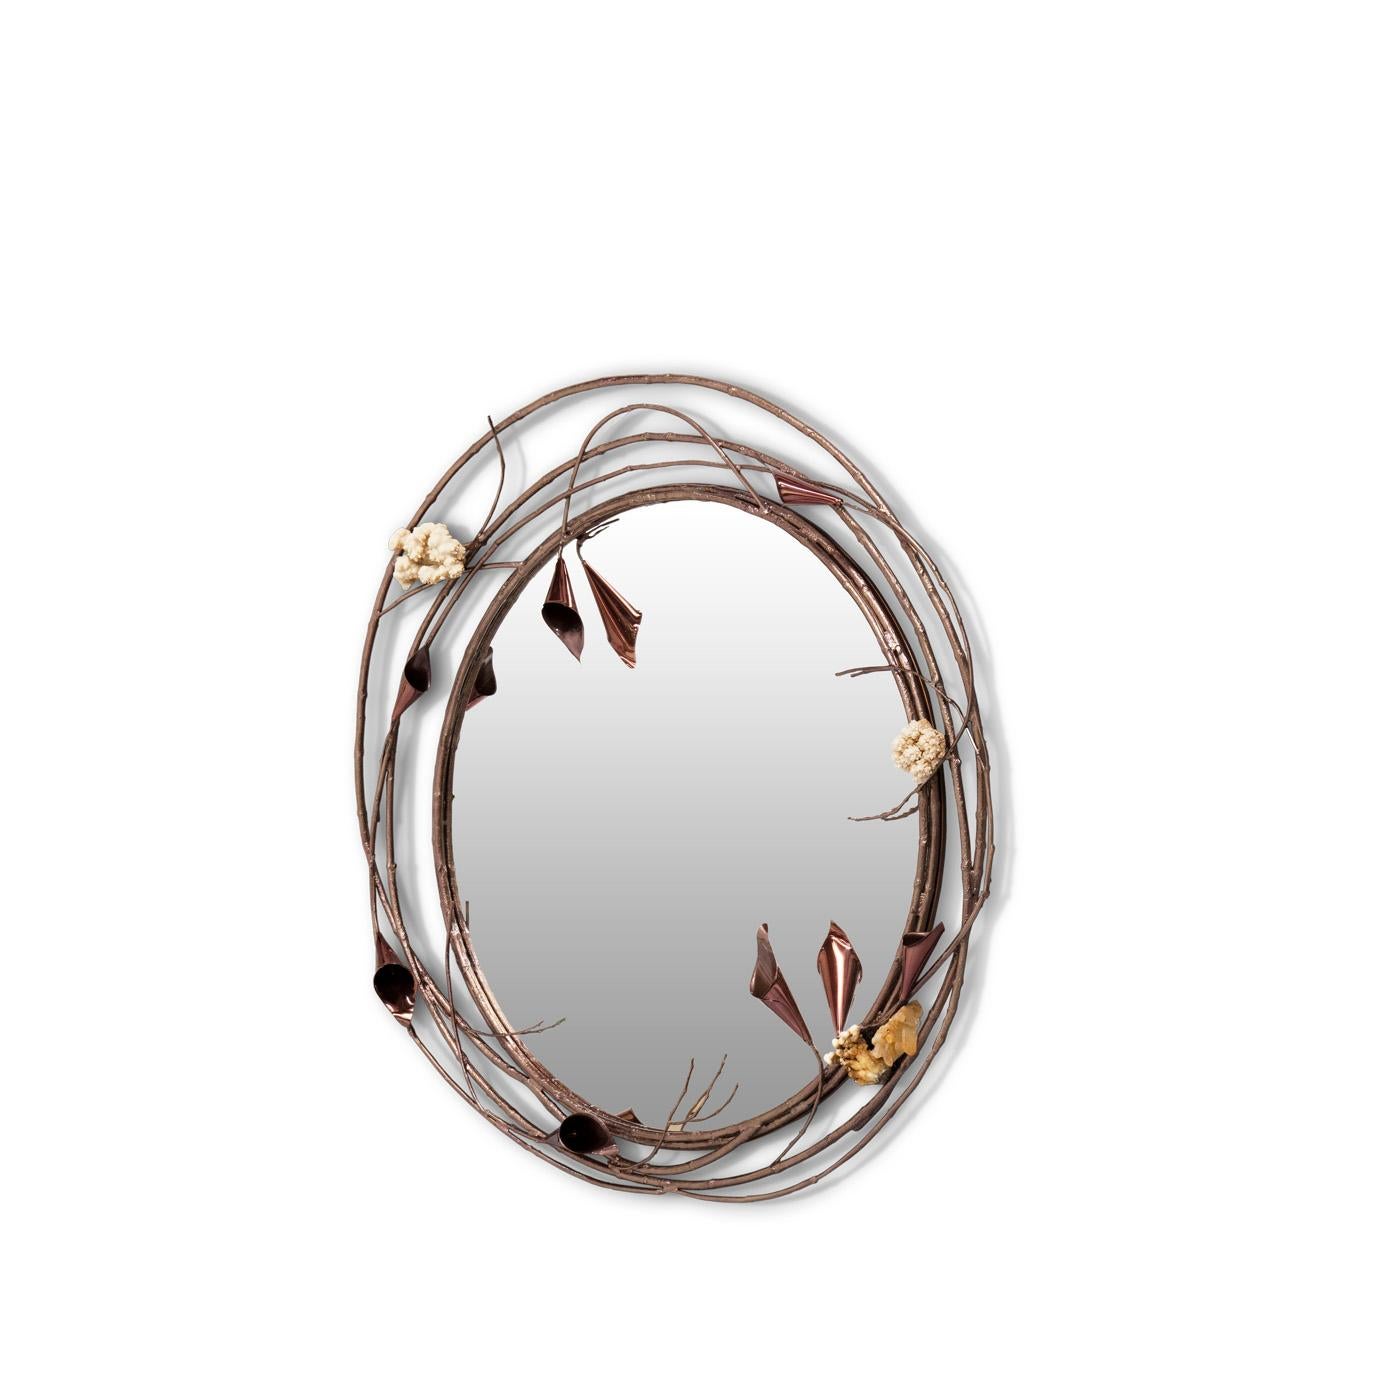 Cherish the beauty of every passing glance or intimate encounter with the flawless mirrored glass and exotic floral frame of the Stella. Fanciful stems and ethereal calla lilies accented with crystals create a charmed halo around anything that is